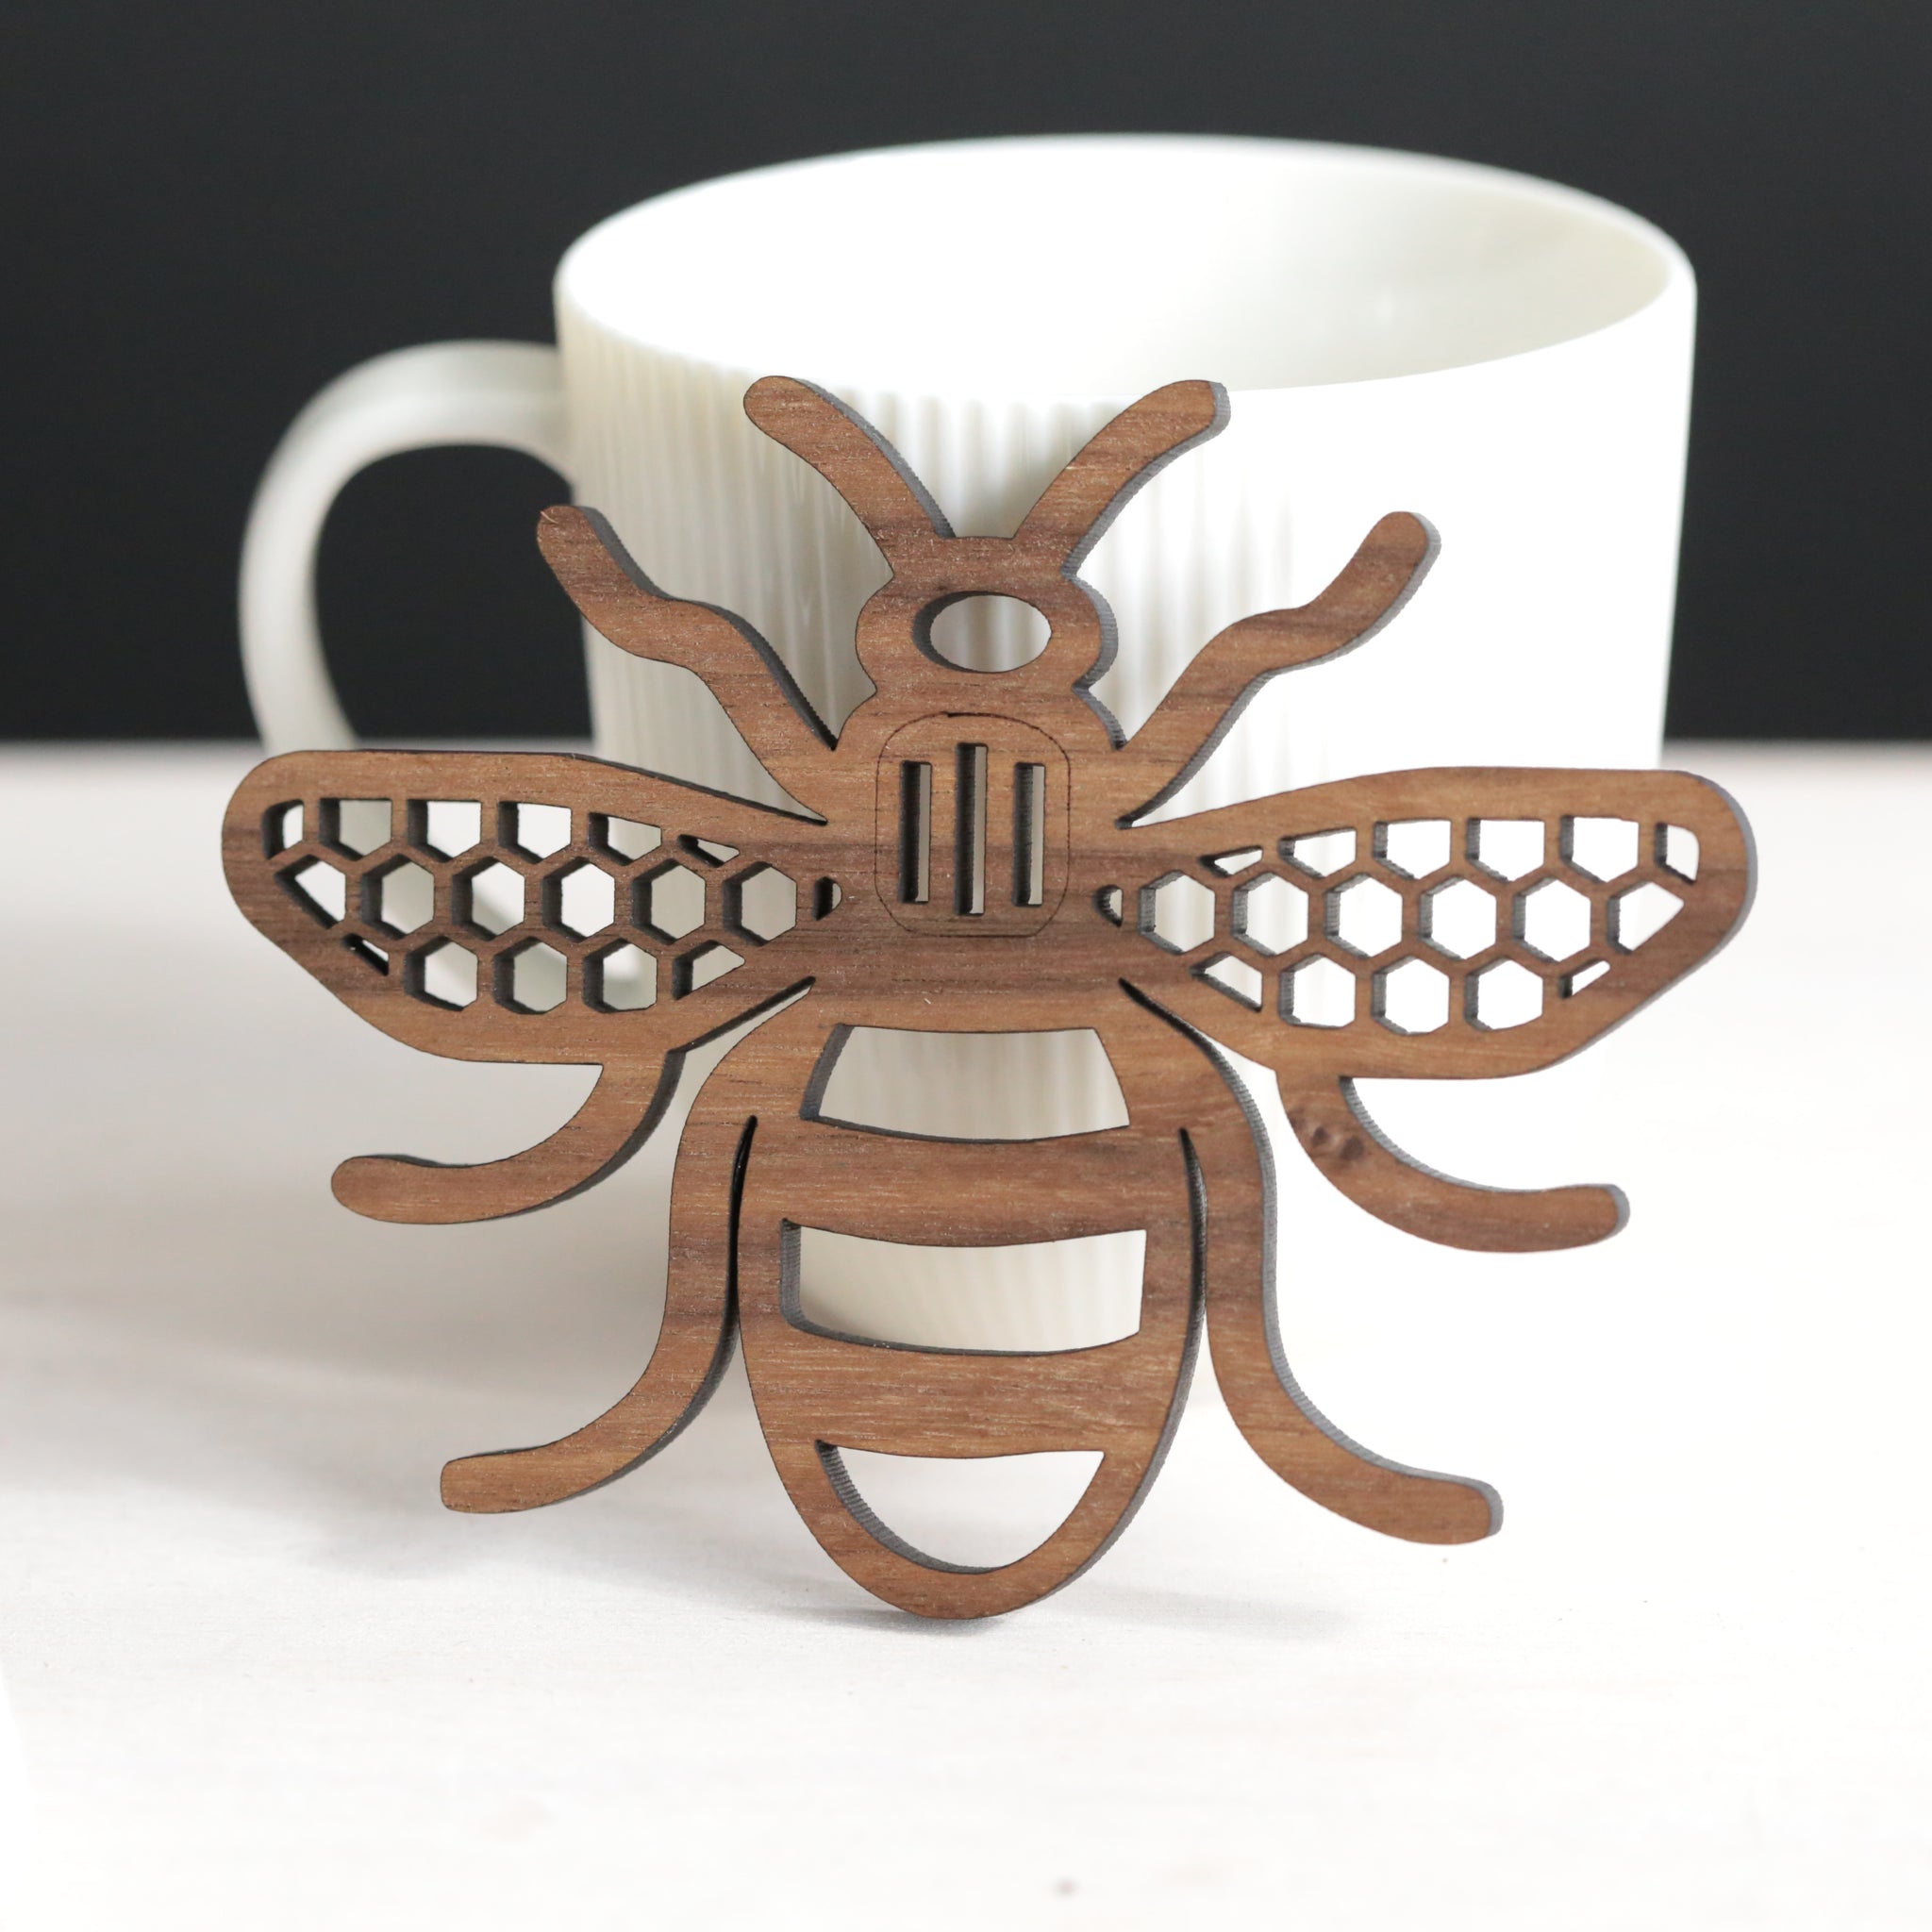 Manchester Bee coasters